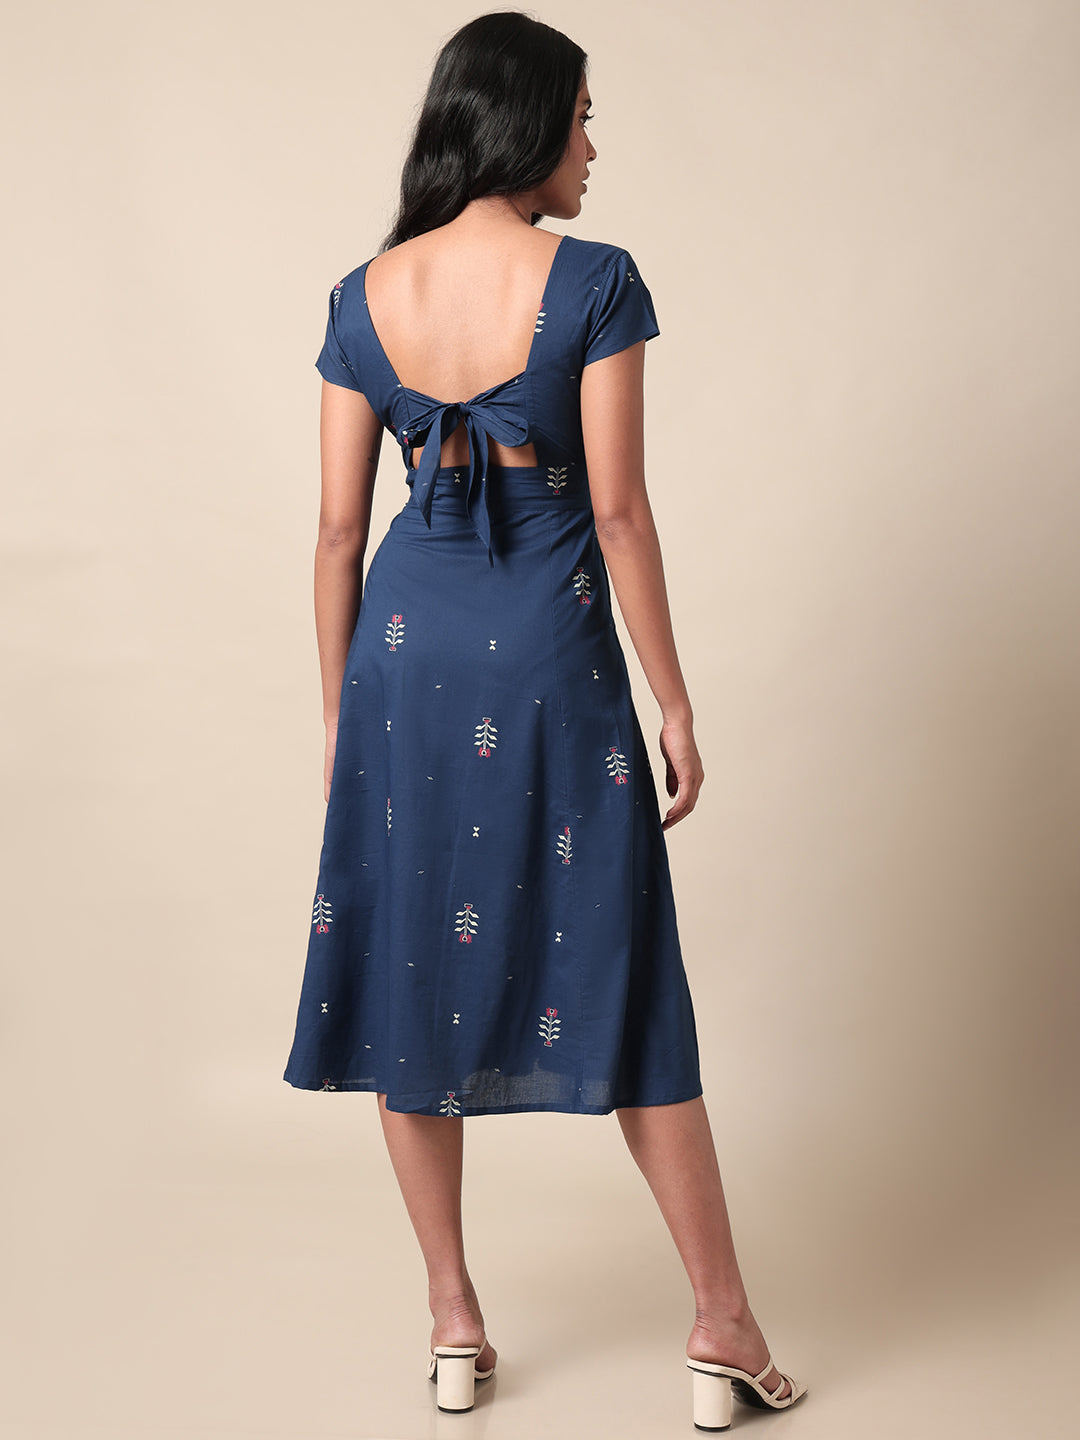 Roohi Printed Navy Blue Dress With Back Tie Up